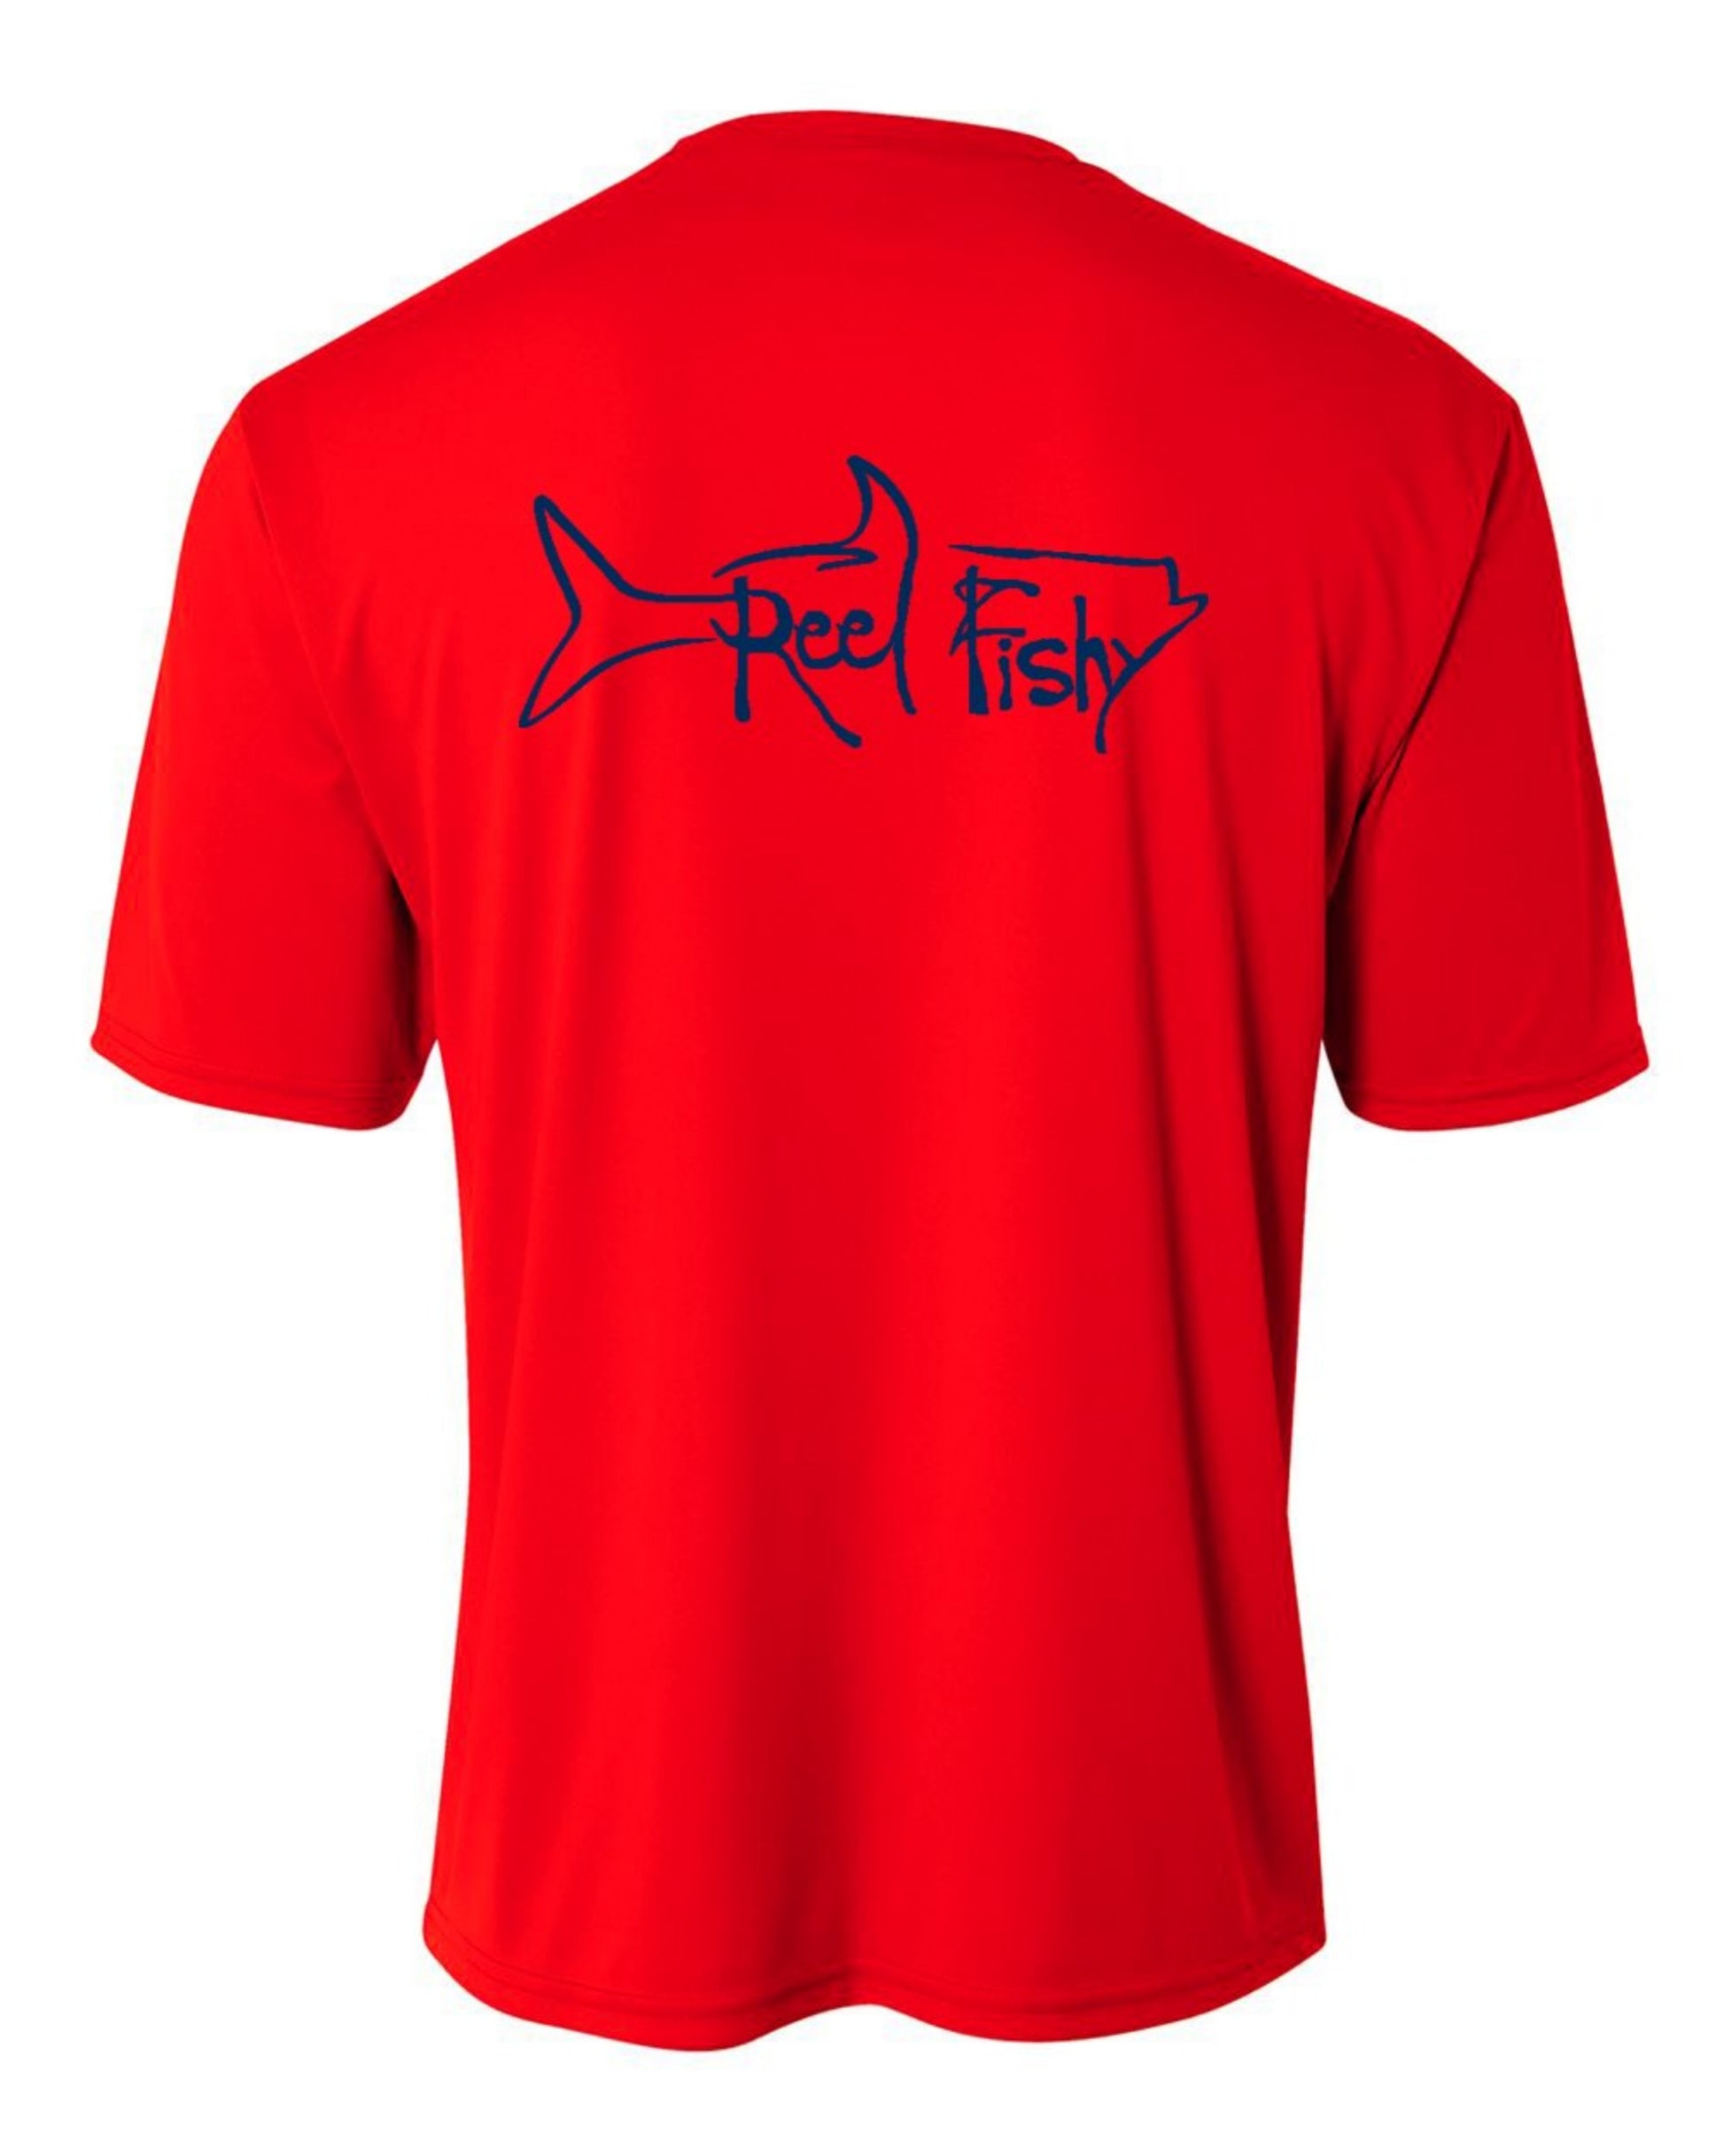 Youth Performance Dry-Fit Tarpon Fishing Shirts 50+Upf Sun Protection - Reel Fishy Apparel S / Red S/S